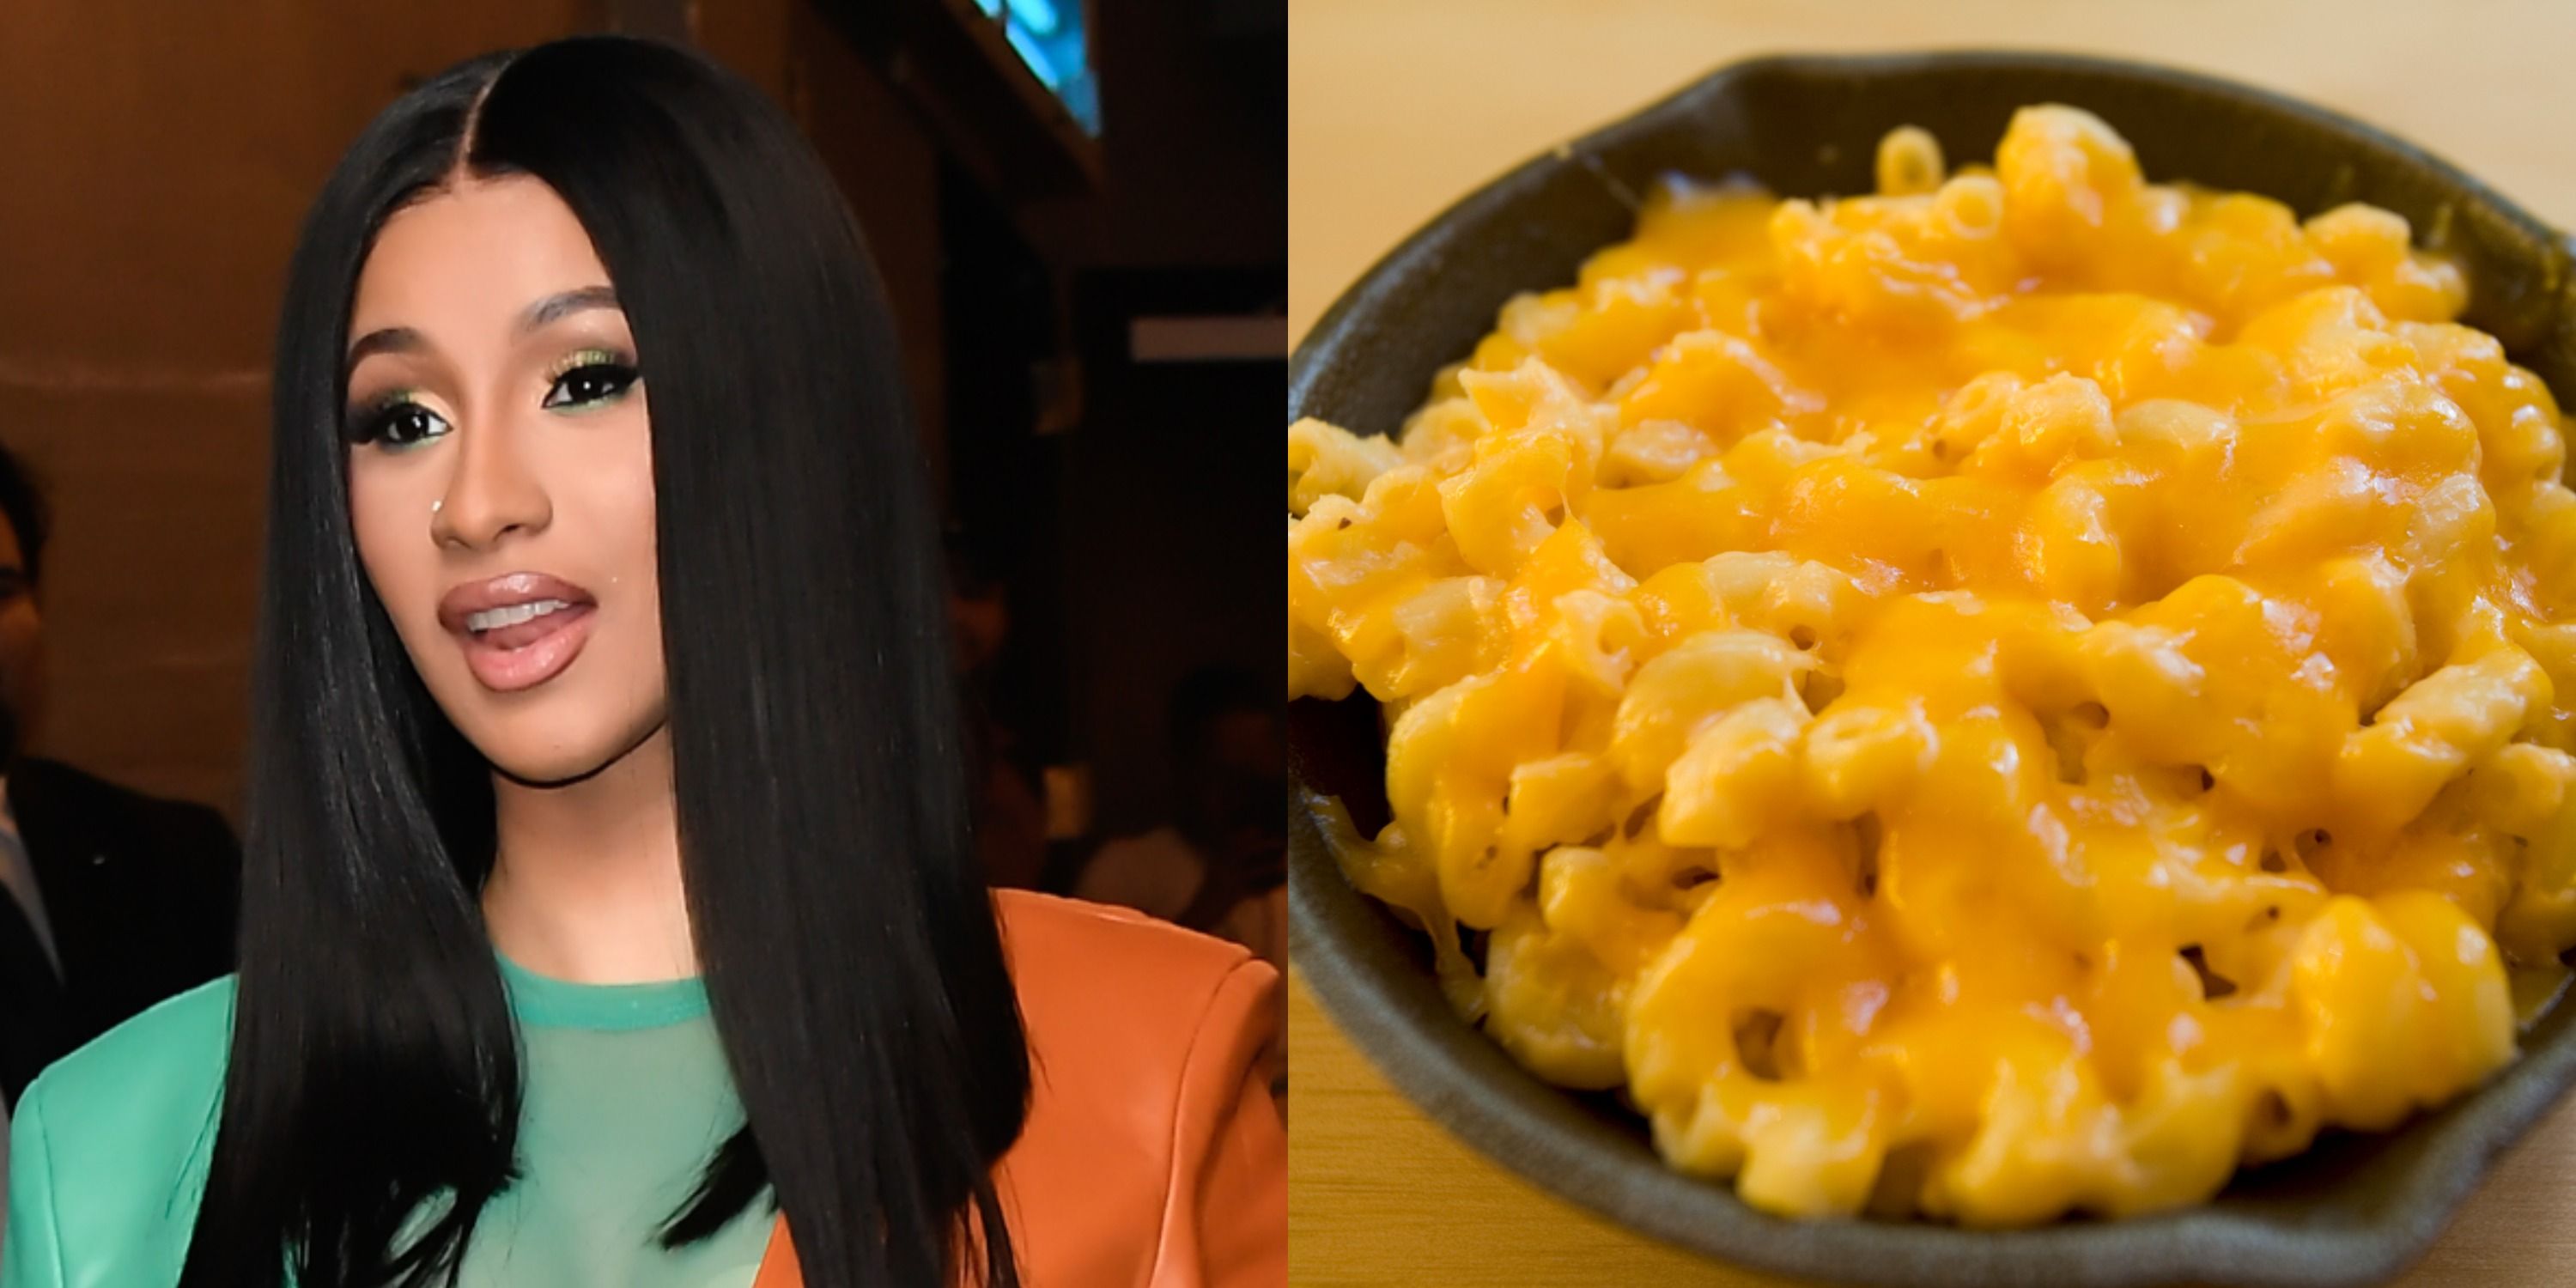 Cardi B Said Offset's Family Wouldn't 'Trust' Her Mac & Cheese On